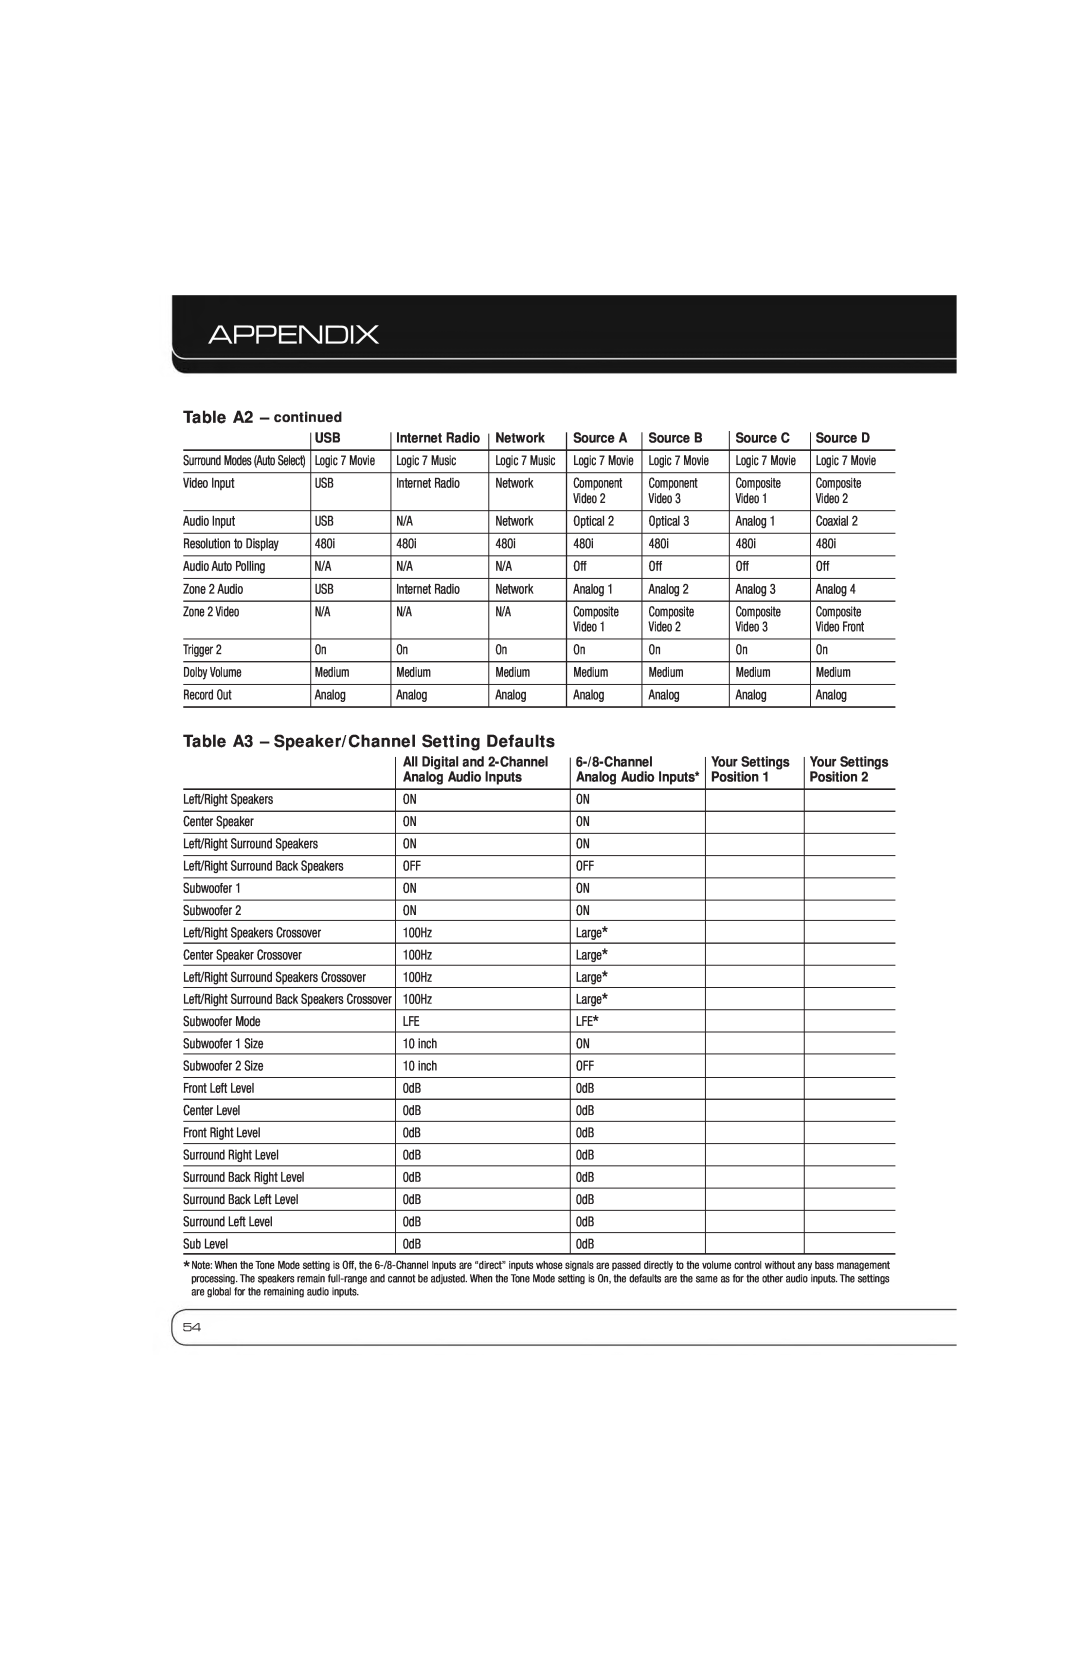 Harman-Kardon AVR 7550HD owner manual Table A2 - continued, Table A3 - Speaker/Channel Setting Defaults, Appendix 